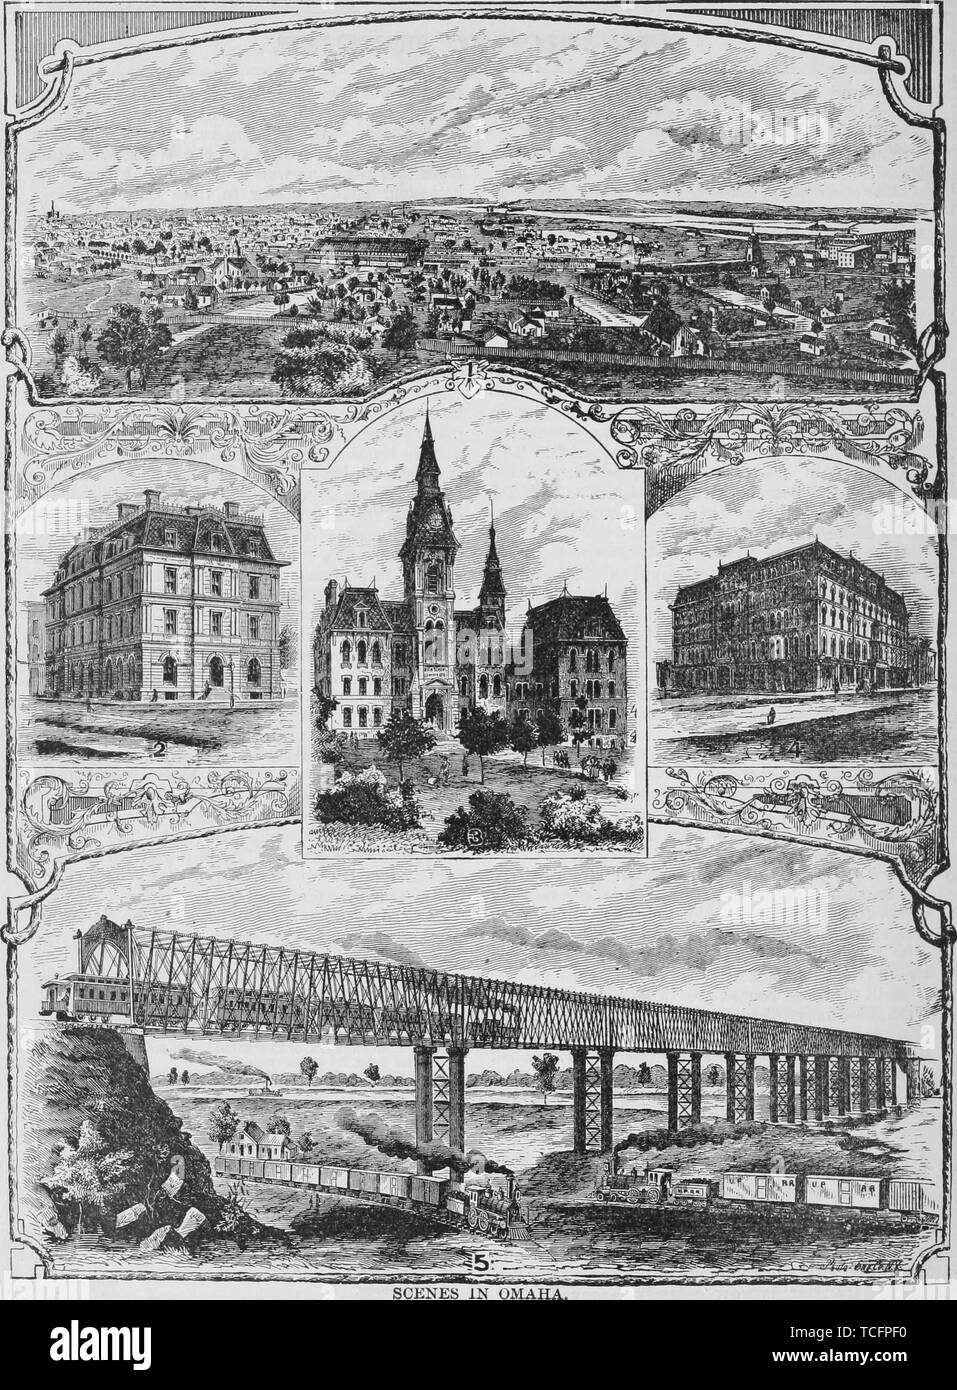 Engravings of the Omaha City scenery, Omaha and Missouri Valley, post office building, high school building, Grand Central hotel, and Missouri River bridge, from the book 'The Pacific tourist' by Henry T. Williams, 1878. Courtesy Internet Archive. () Stock Photo